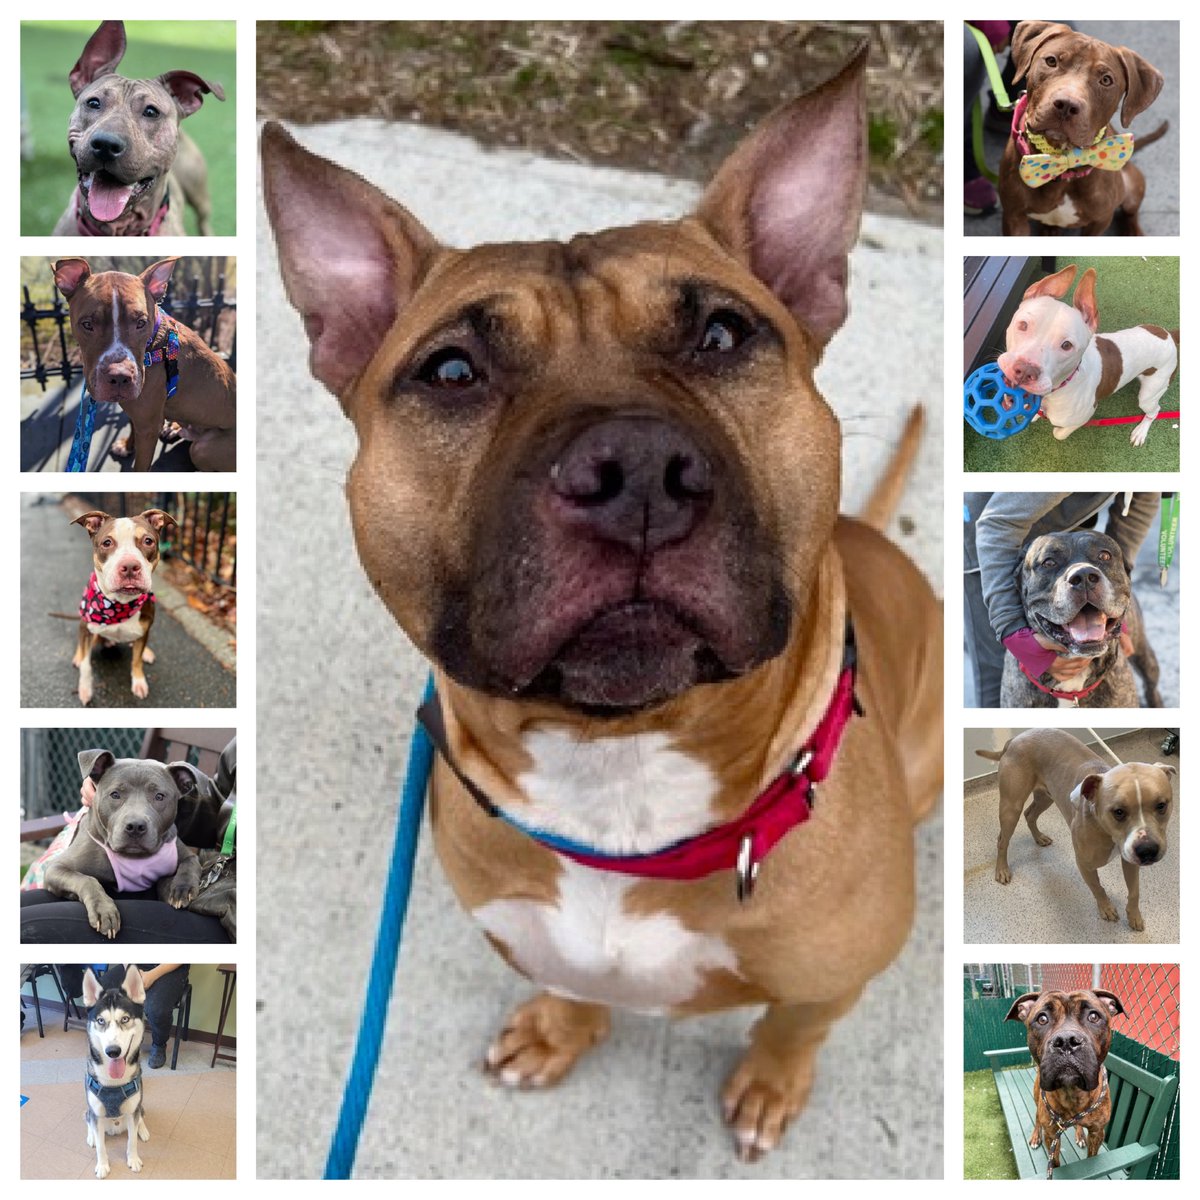 The @NYCACC ghouls have compiled a list of 29 dogs they want to dispose of Saturday. Ten of those are new to the list and Zochitl is back from adoptions. We need your help: please repost/share and pledge if you're able, email keitholbermanndogs@gmail.com for assistance. Posts…